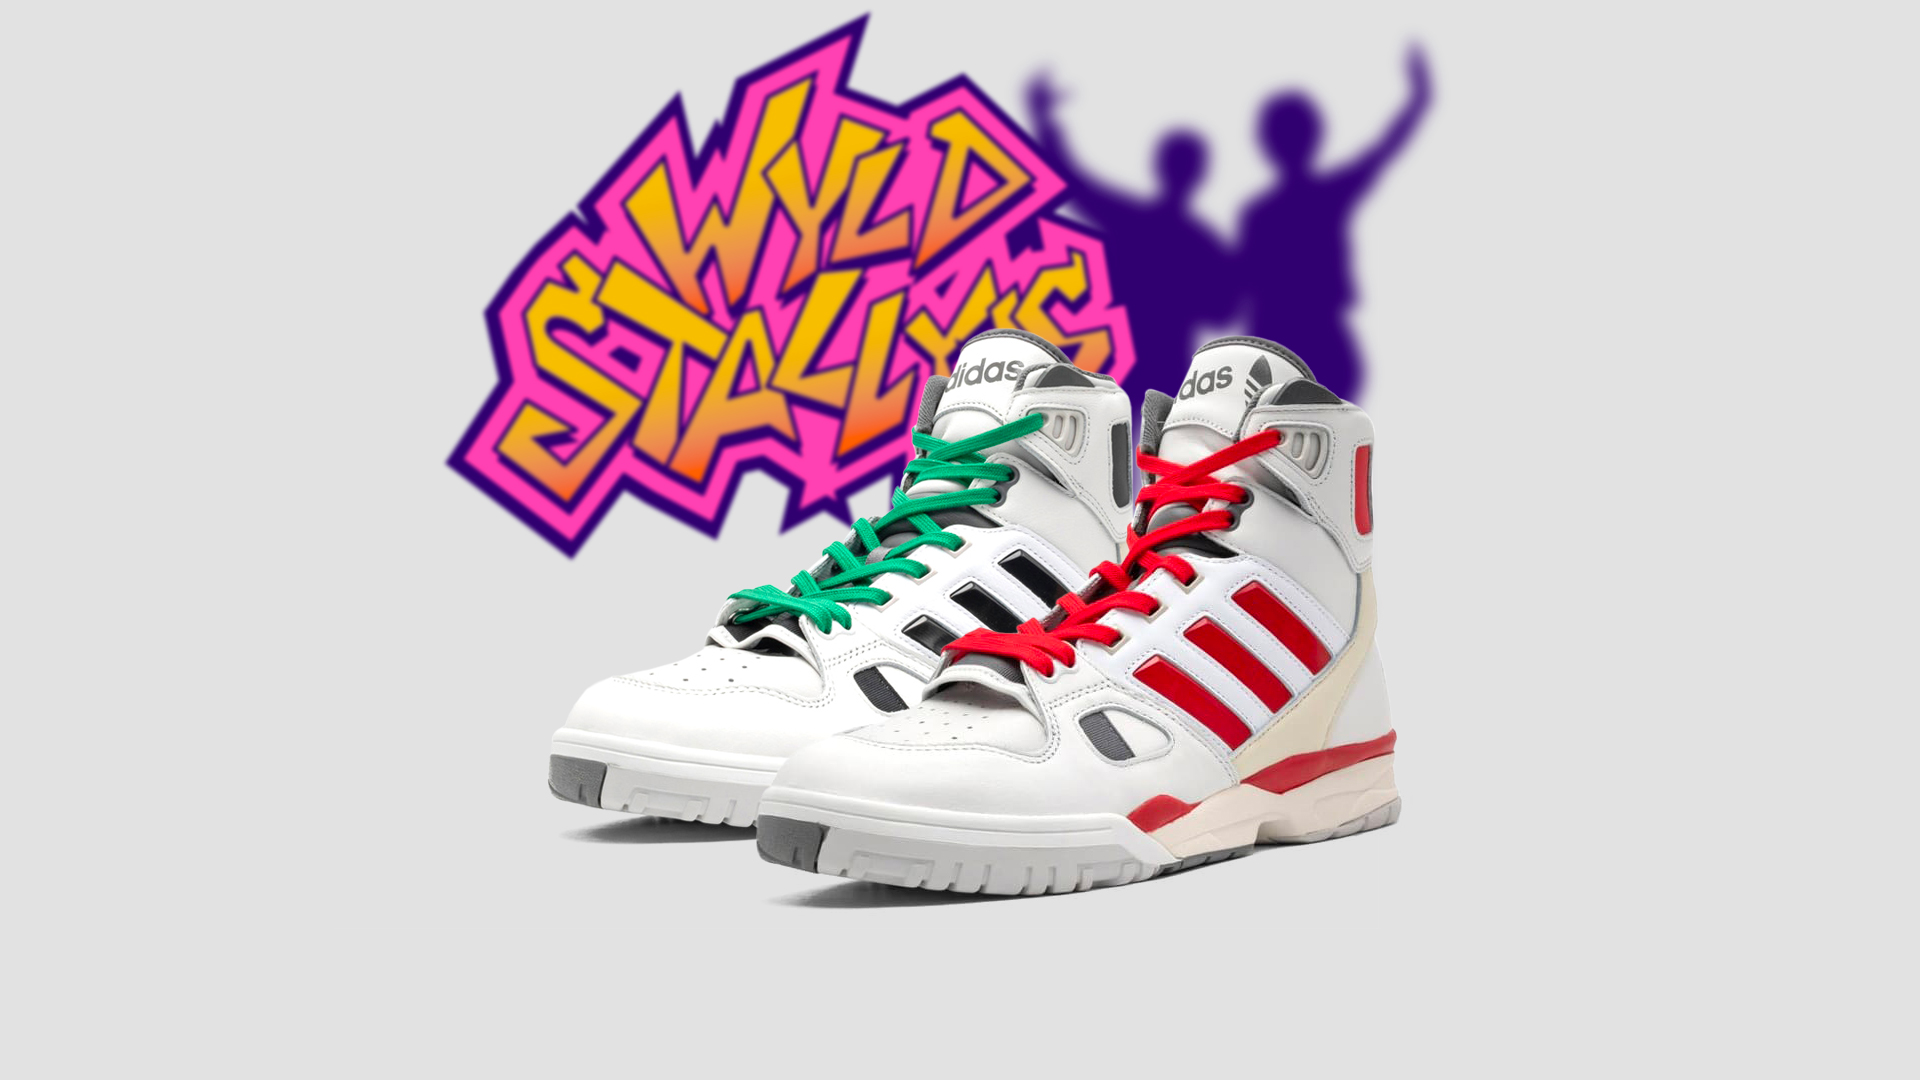 adidas Pay Homage To Bill \u0026 Ted's Wyld 